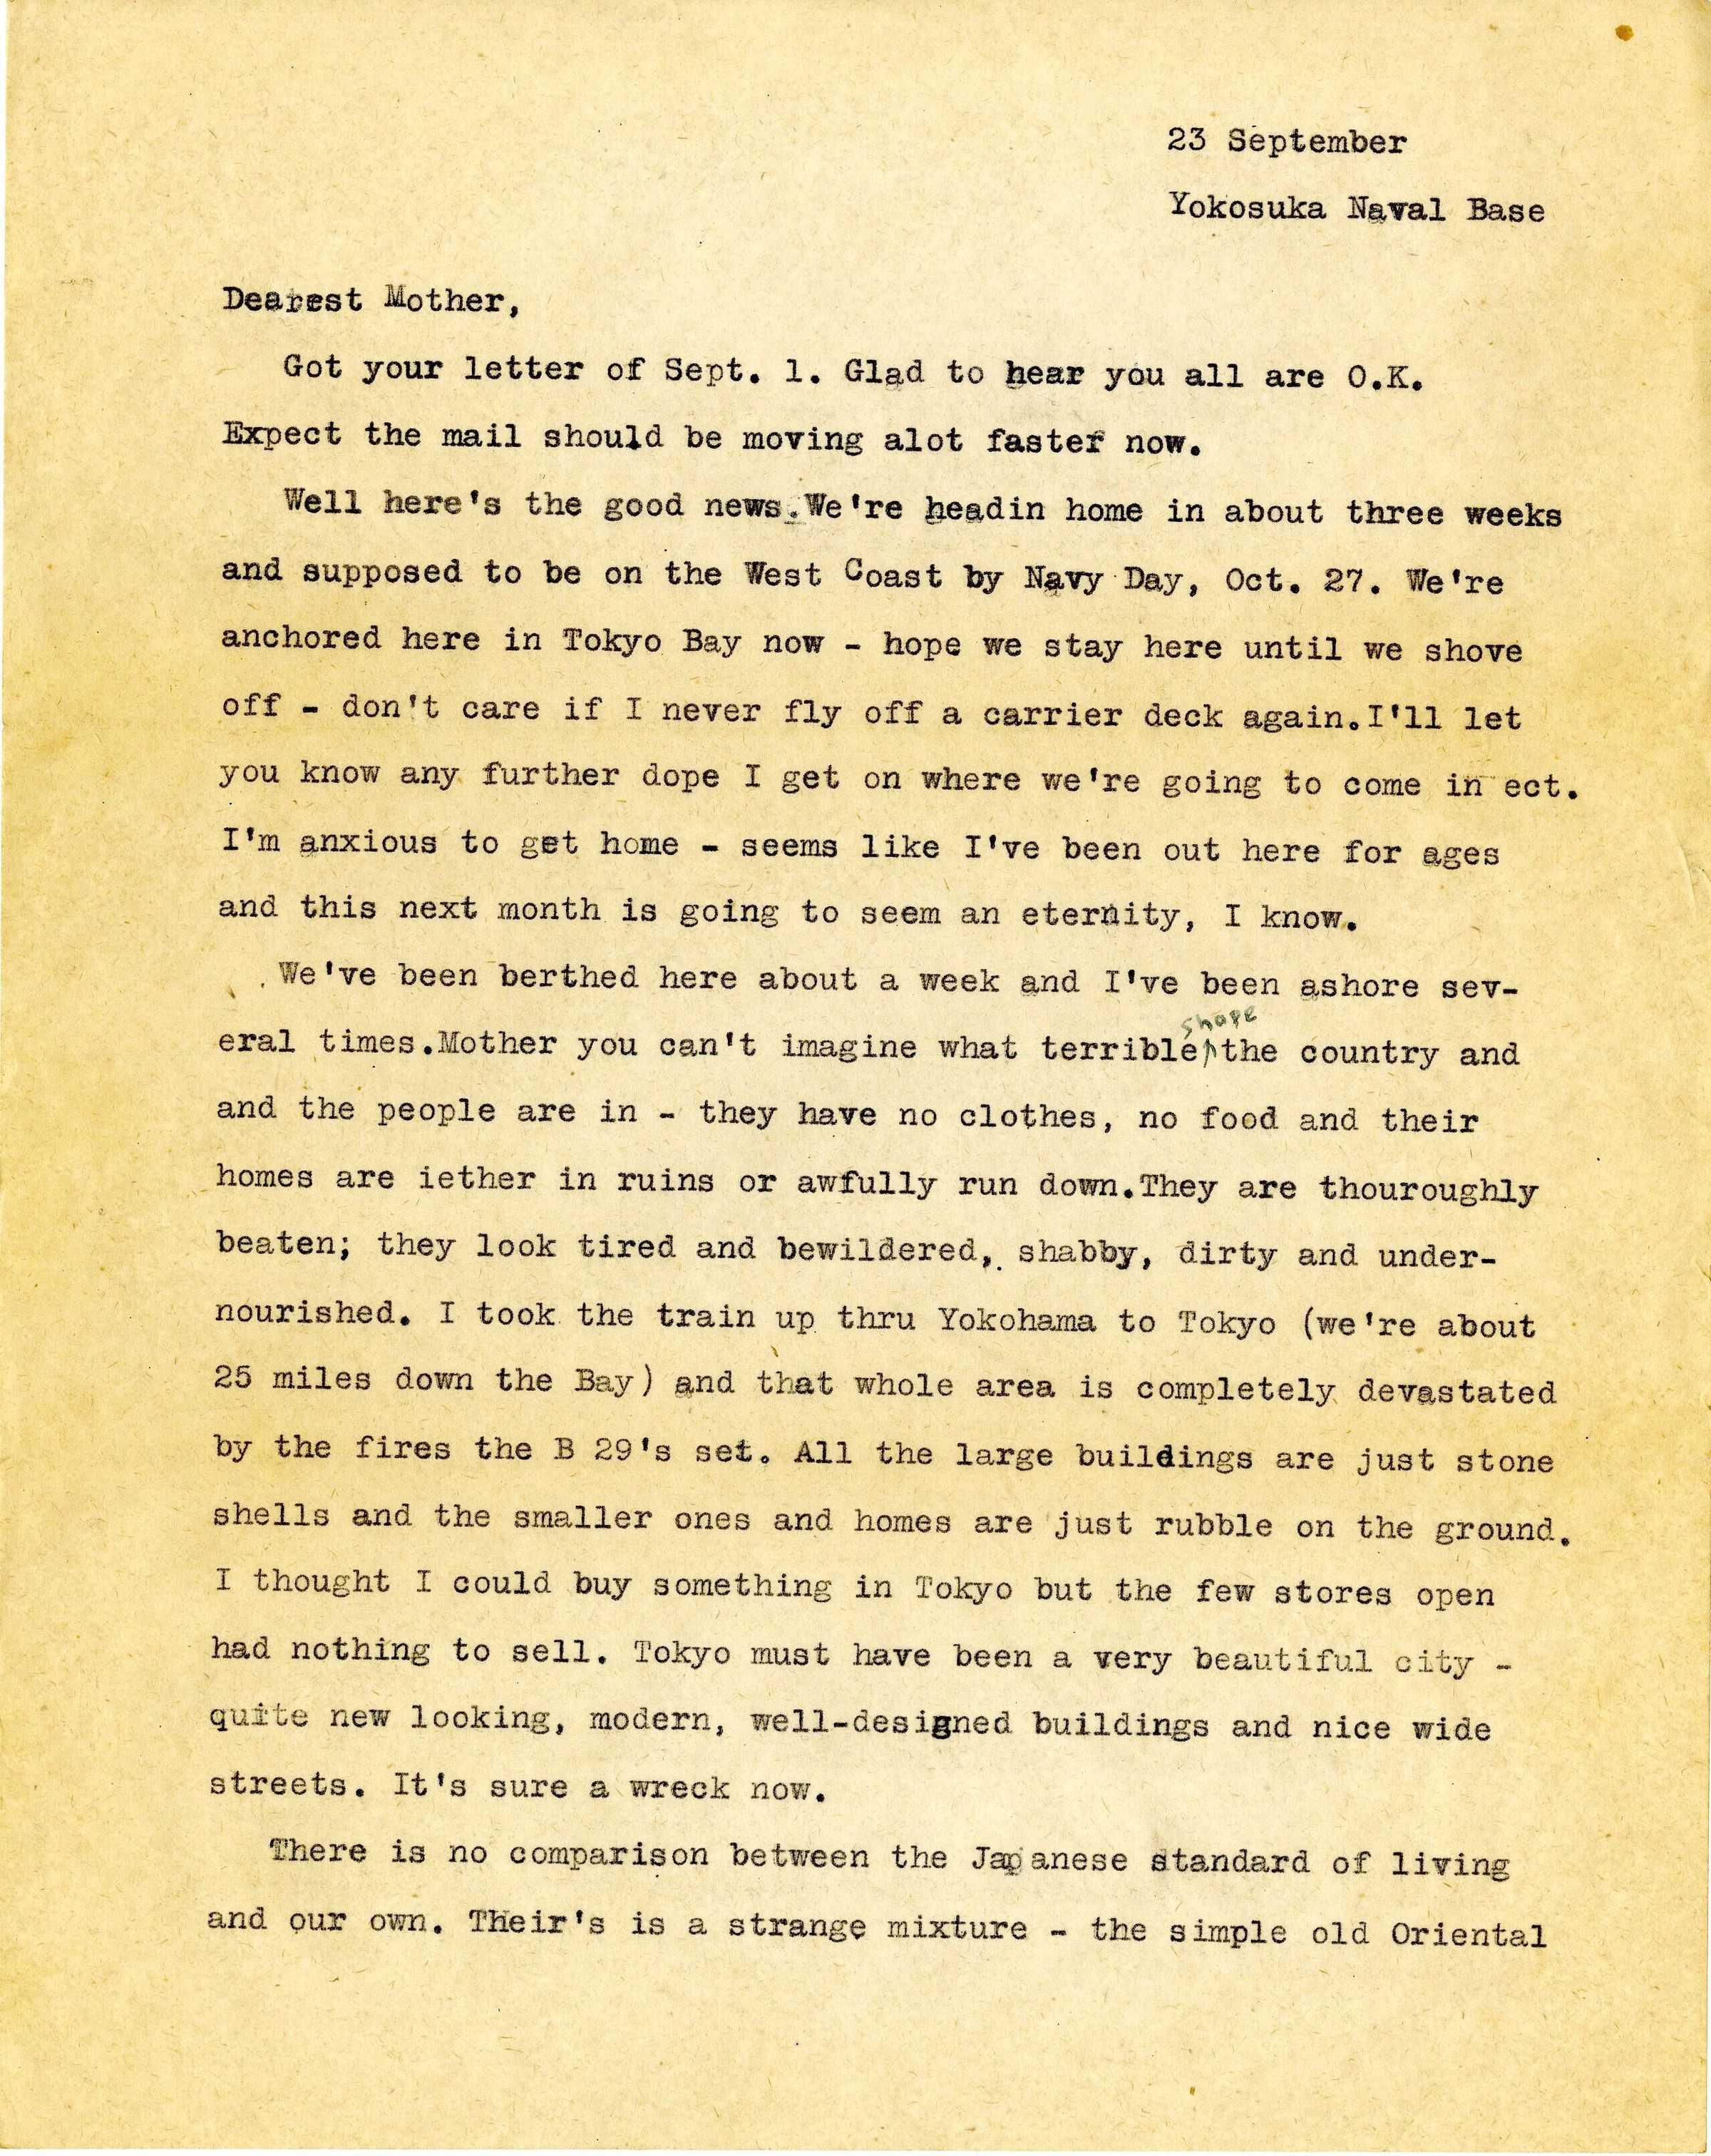 Primary Image of Letter from Lt. Gerald Hennesy to His Mother Dated September 23, 1945